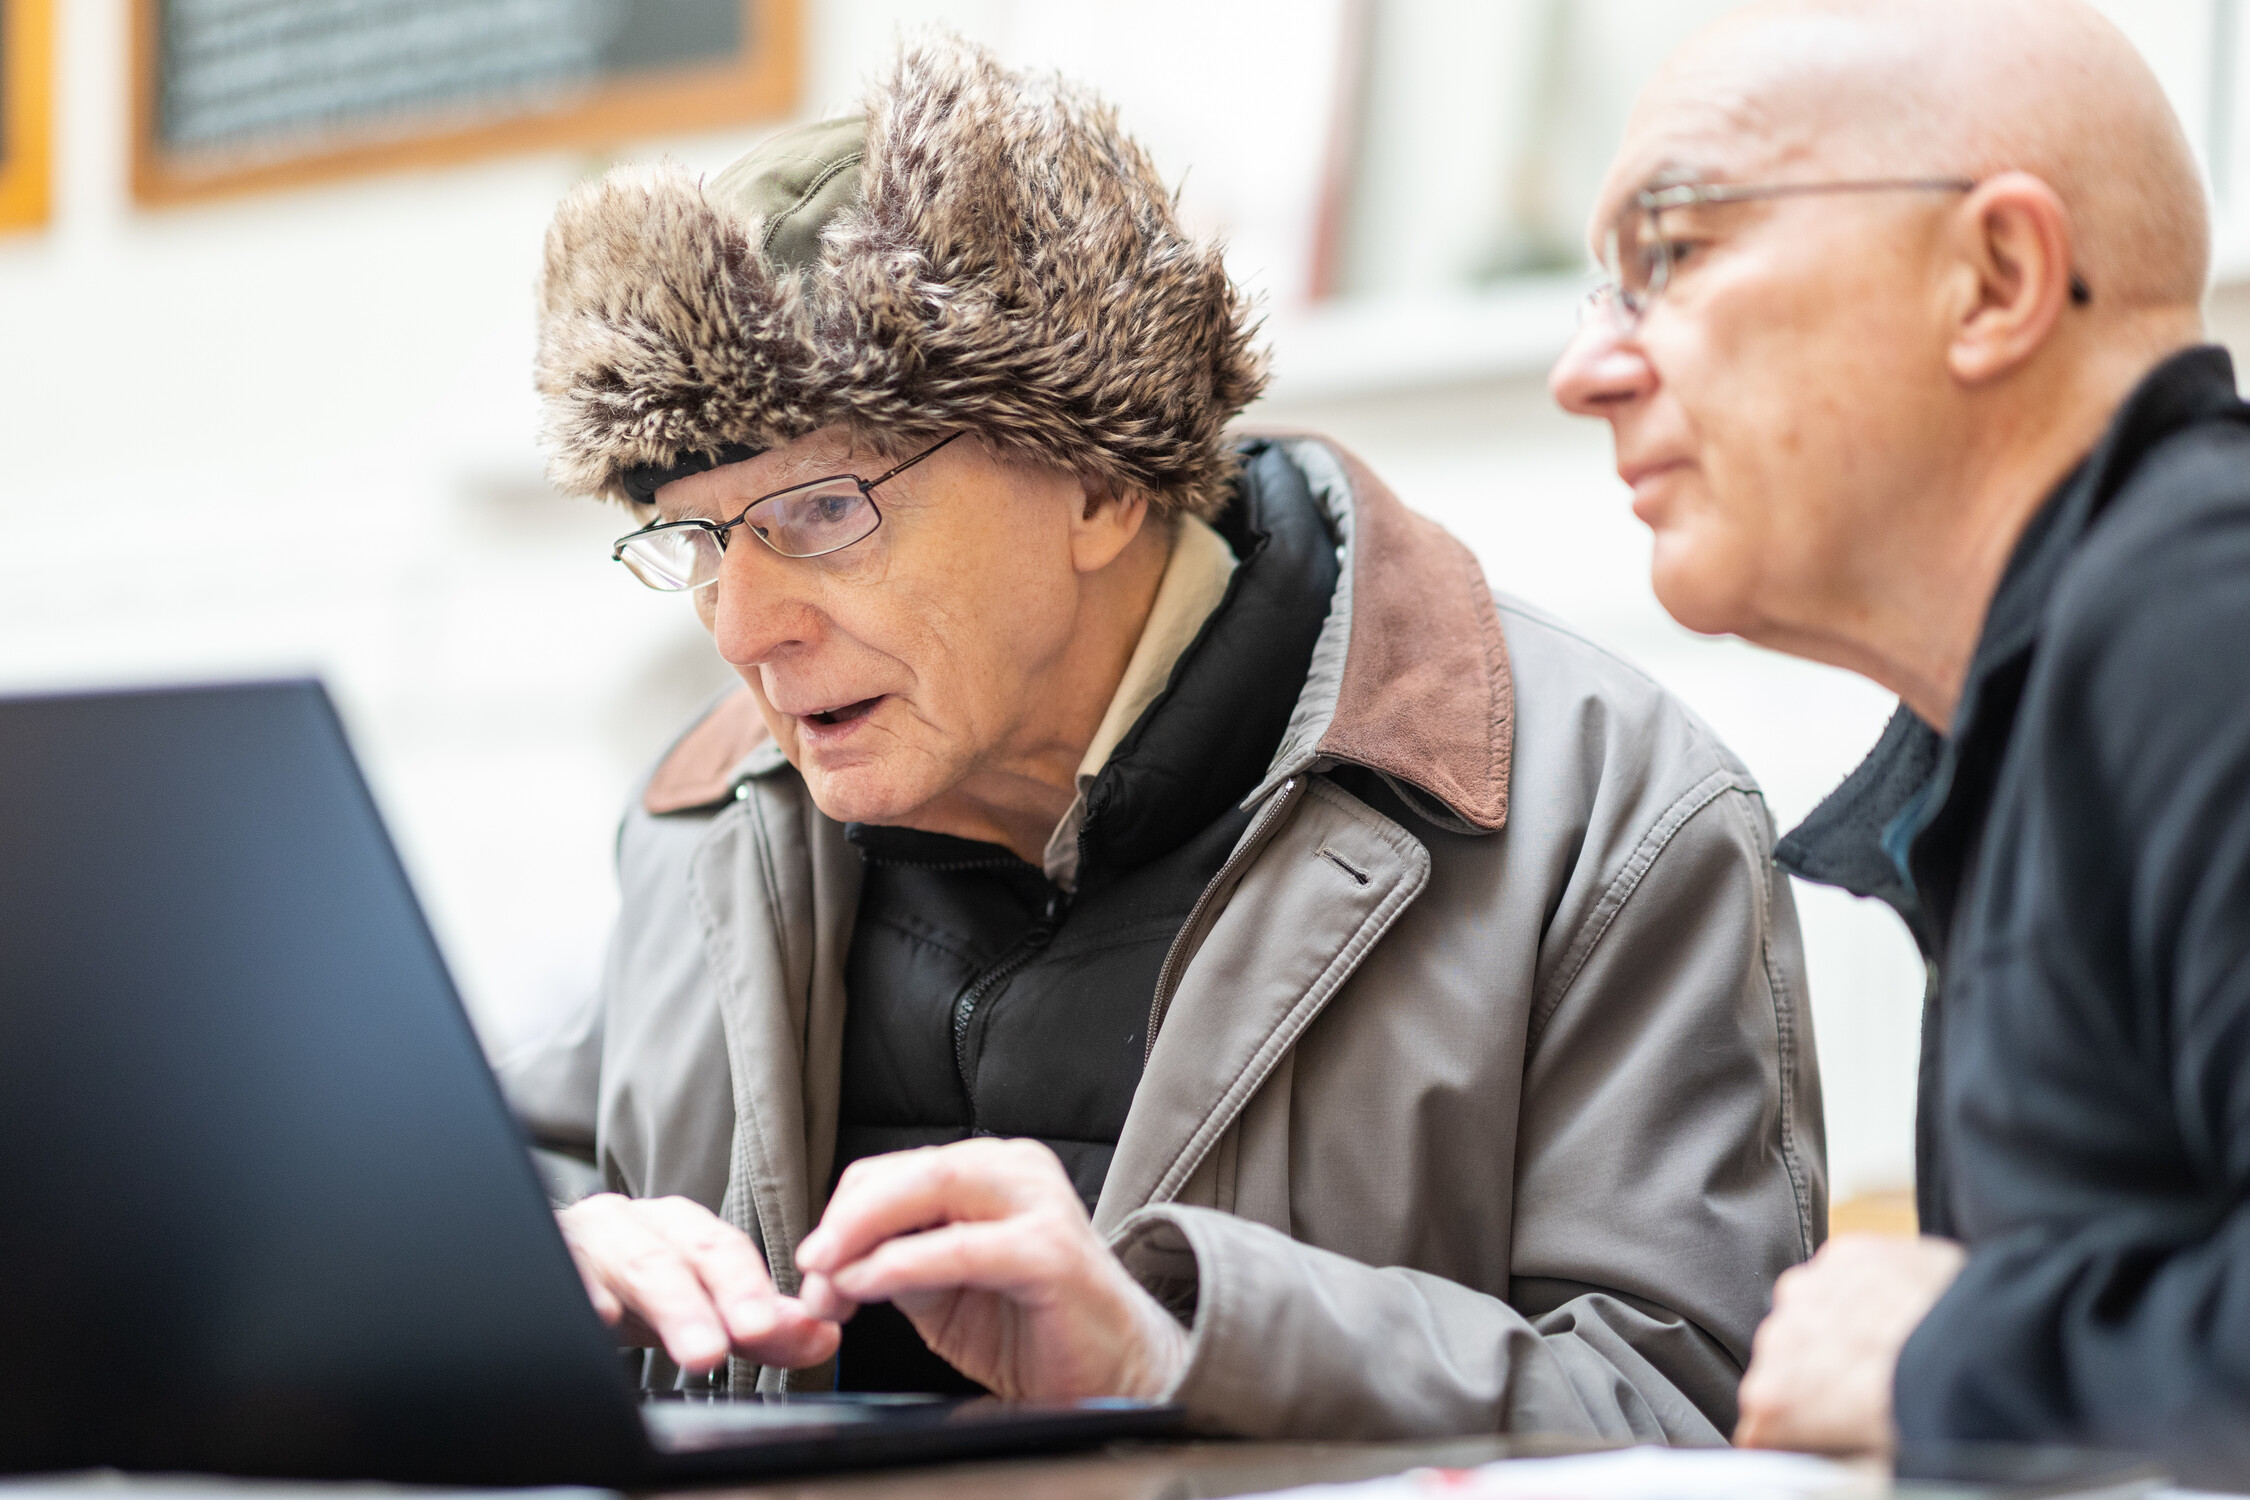 More than 1 in 3 over 65s lack the basic skills to use the internet successfully and safely